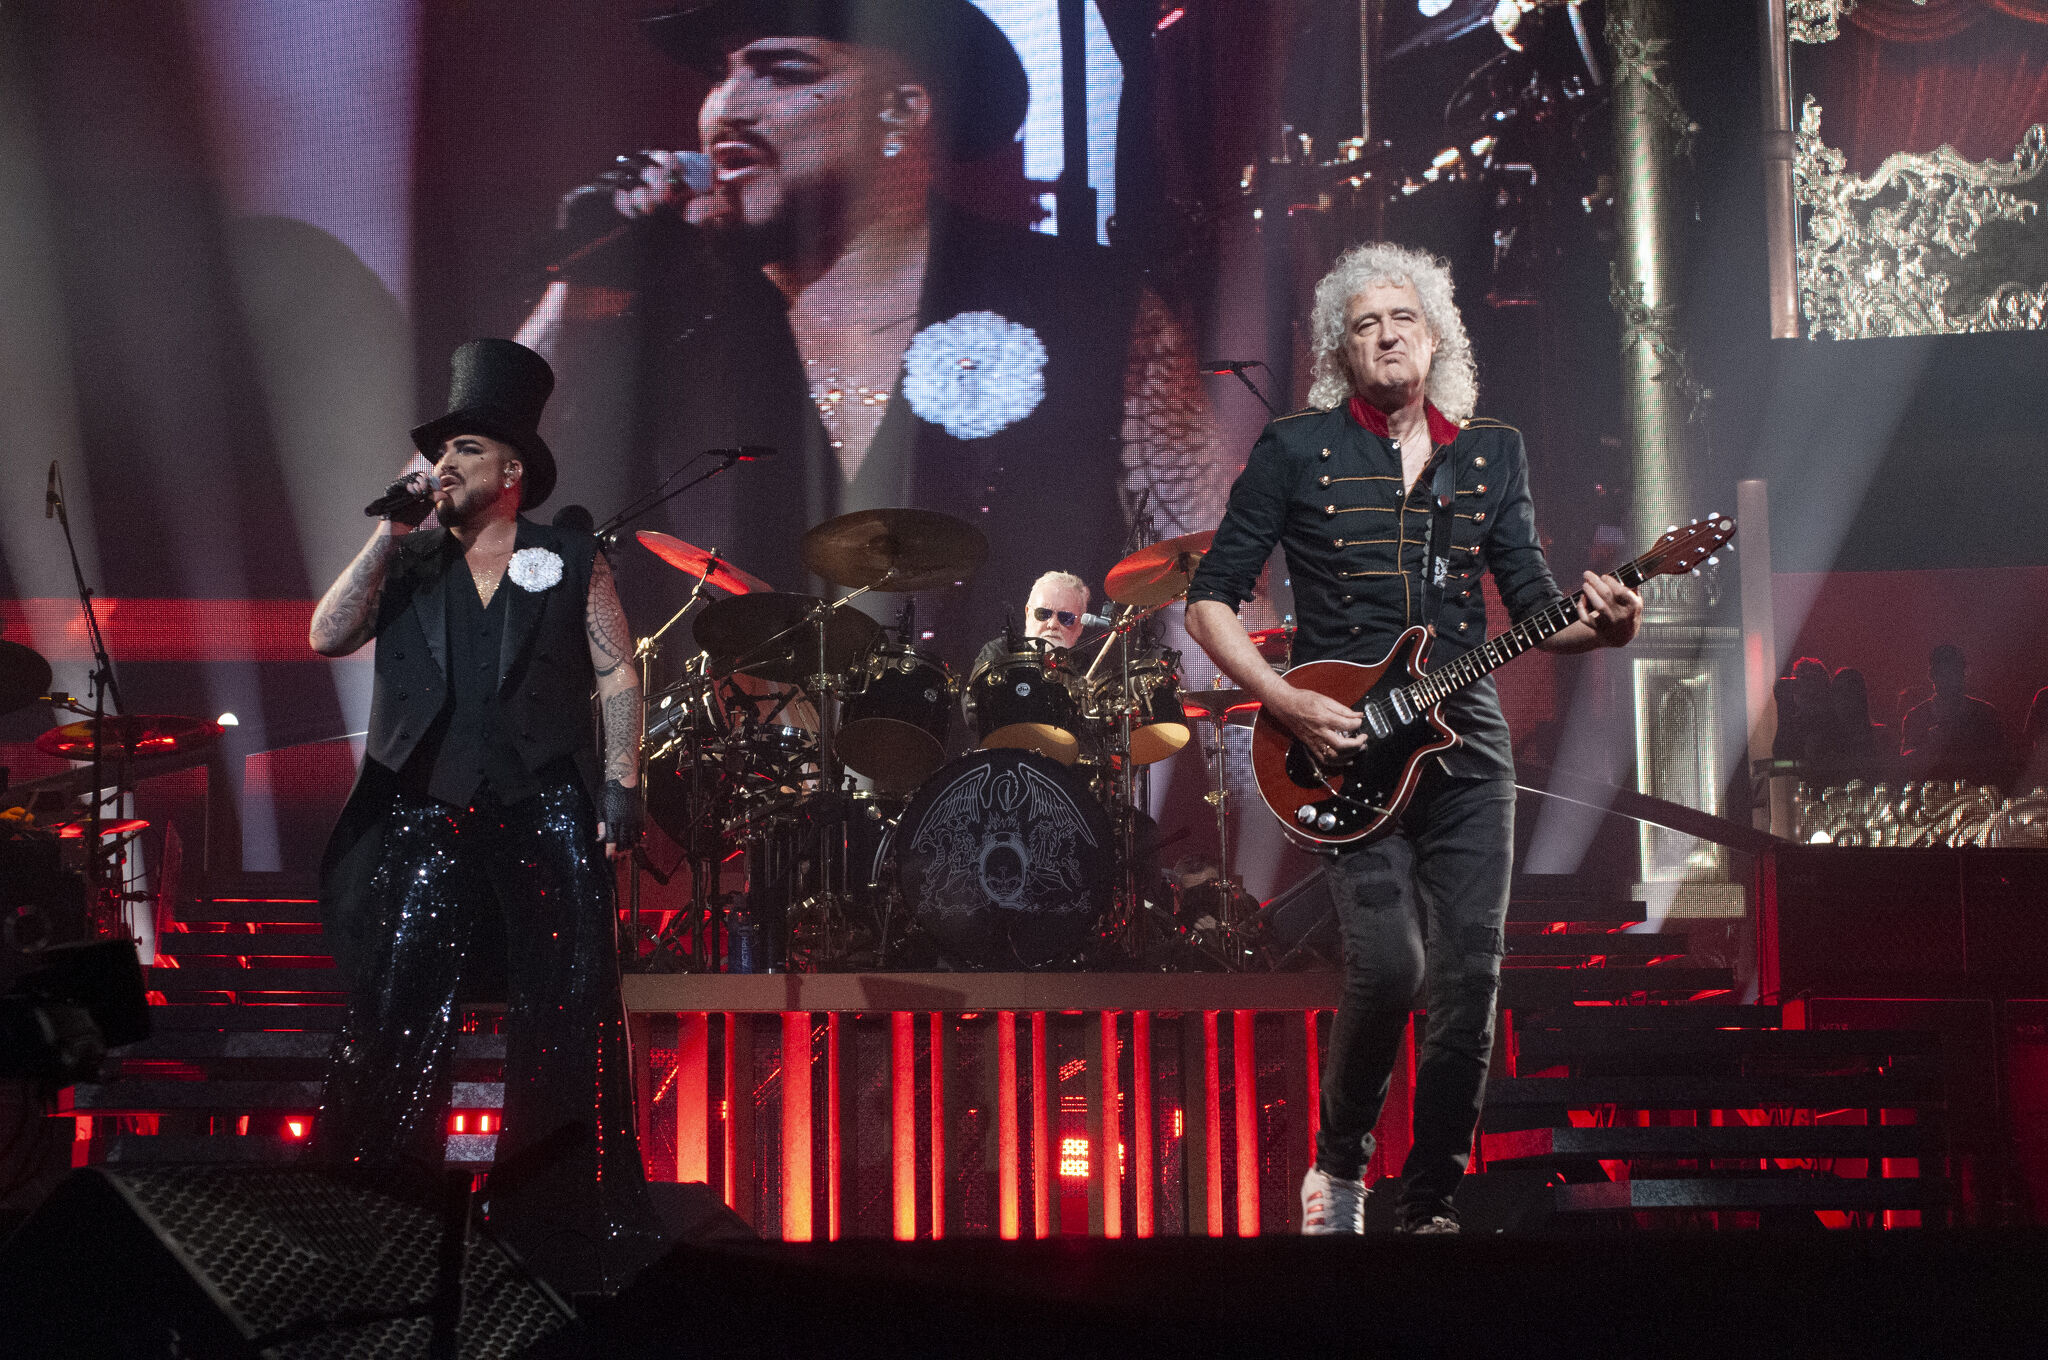 queen north american tour 2023 tickets